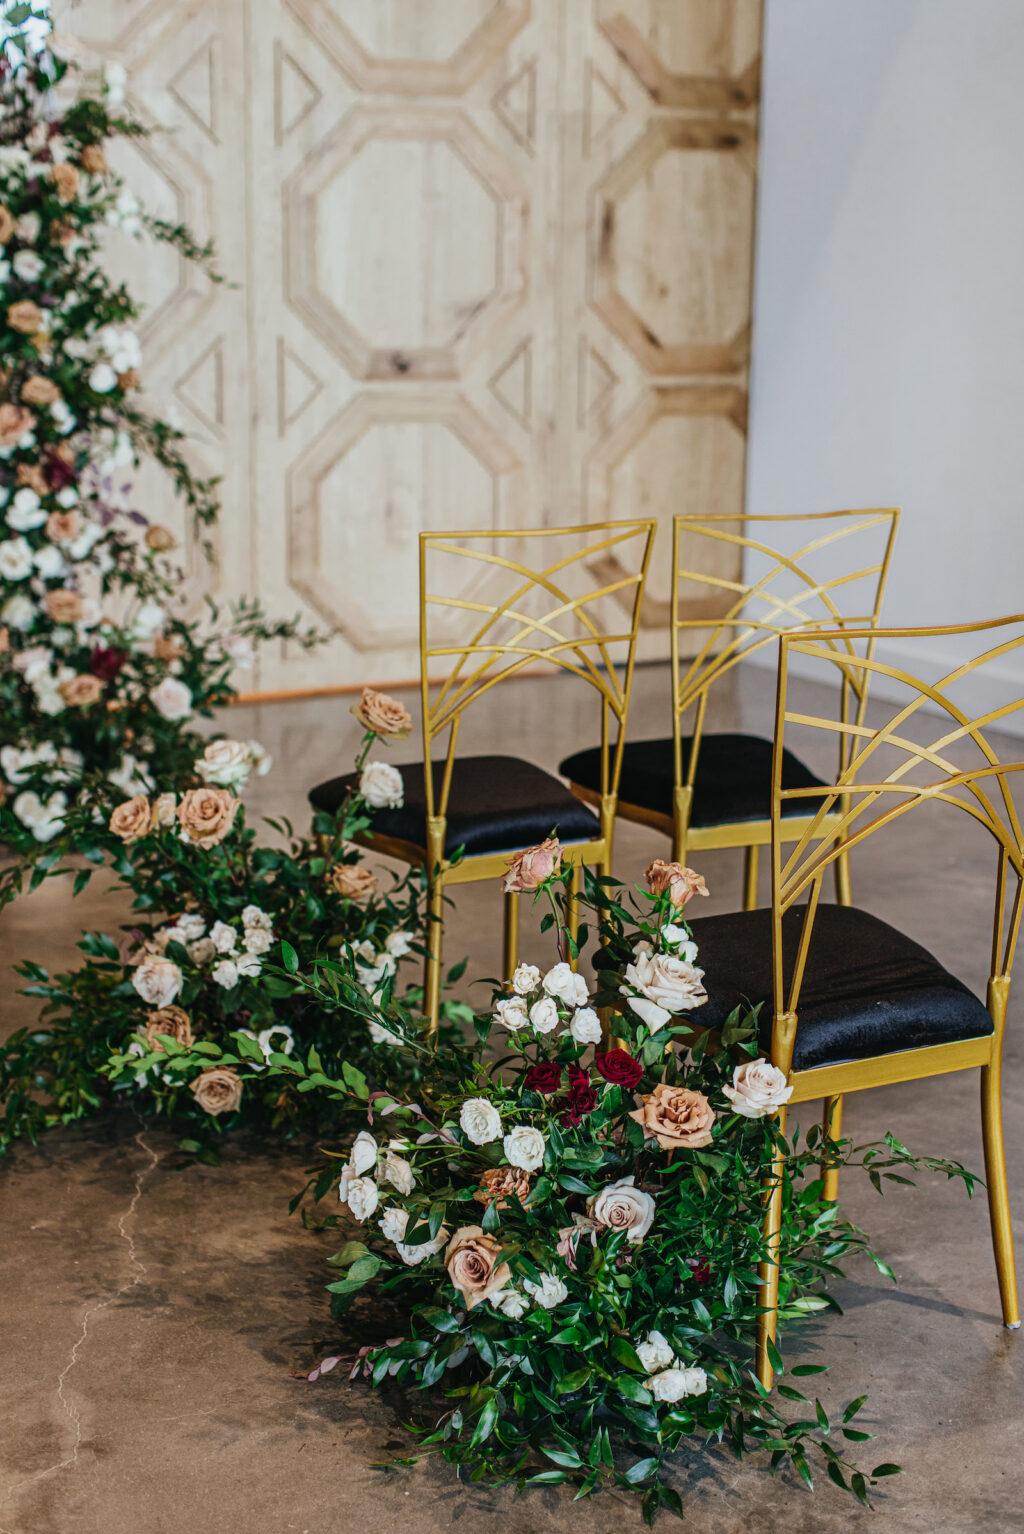 Modern and Edgy Fall Wedding Decor, Chic Gold Chairs, Greenery and Blush Pink, White and Mauve Roses Floral Arrangements | South Tampa Wedding Venue Hyde House | Wedding Rentals Kate Ryan Event Rentals